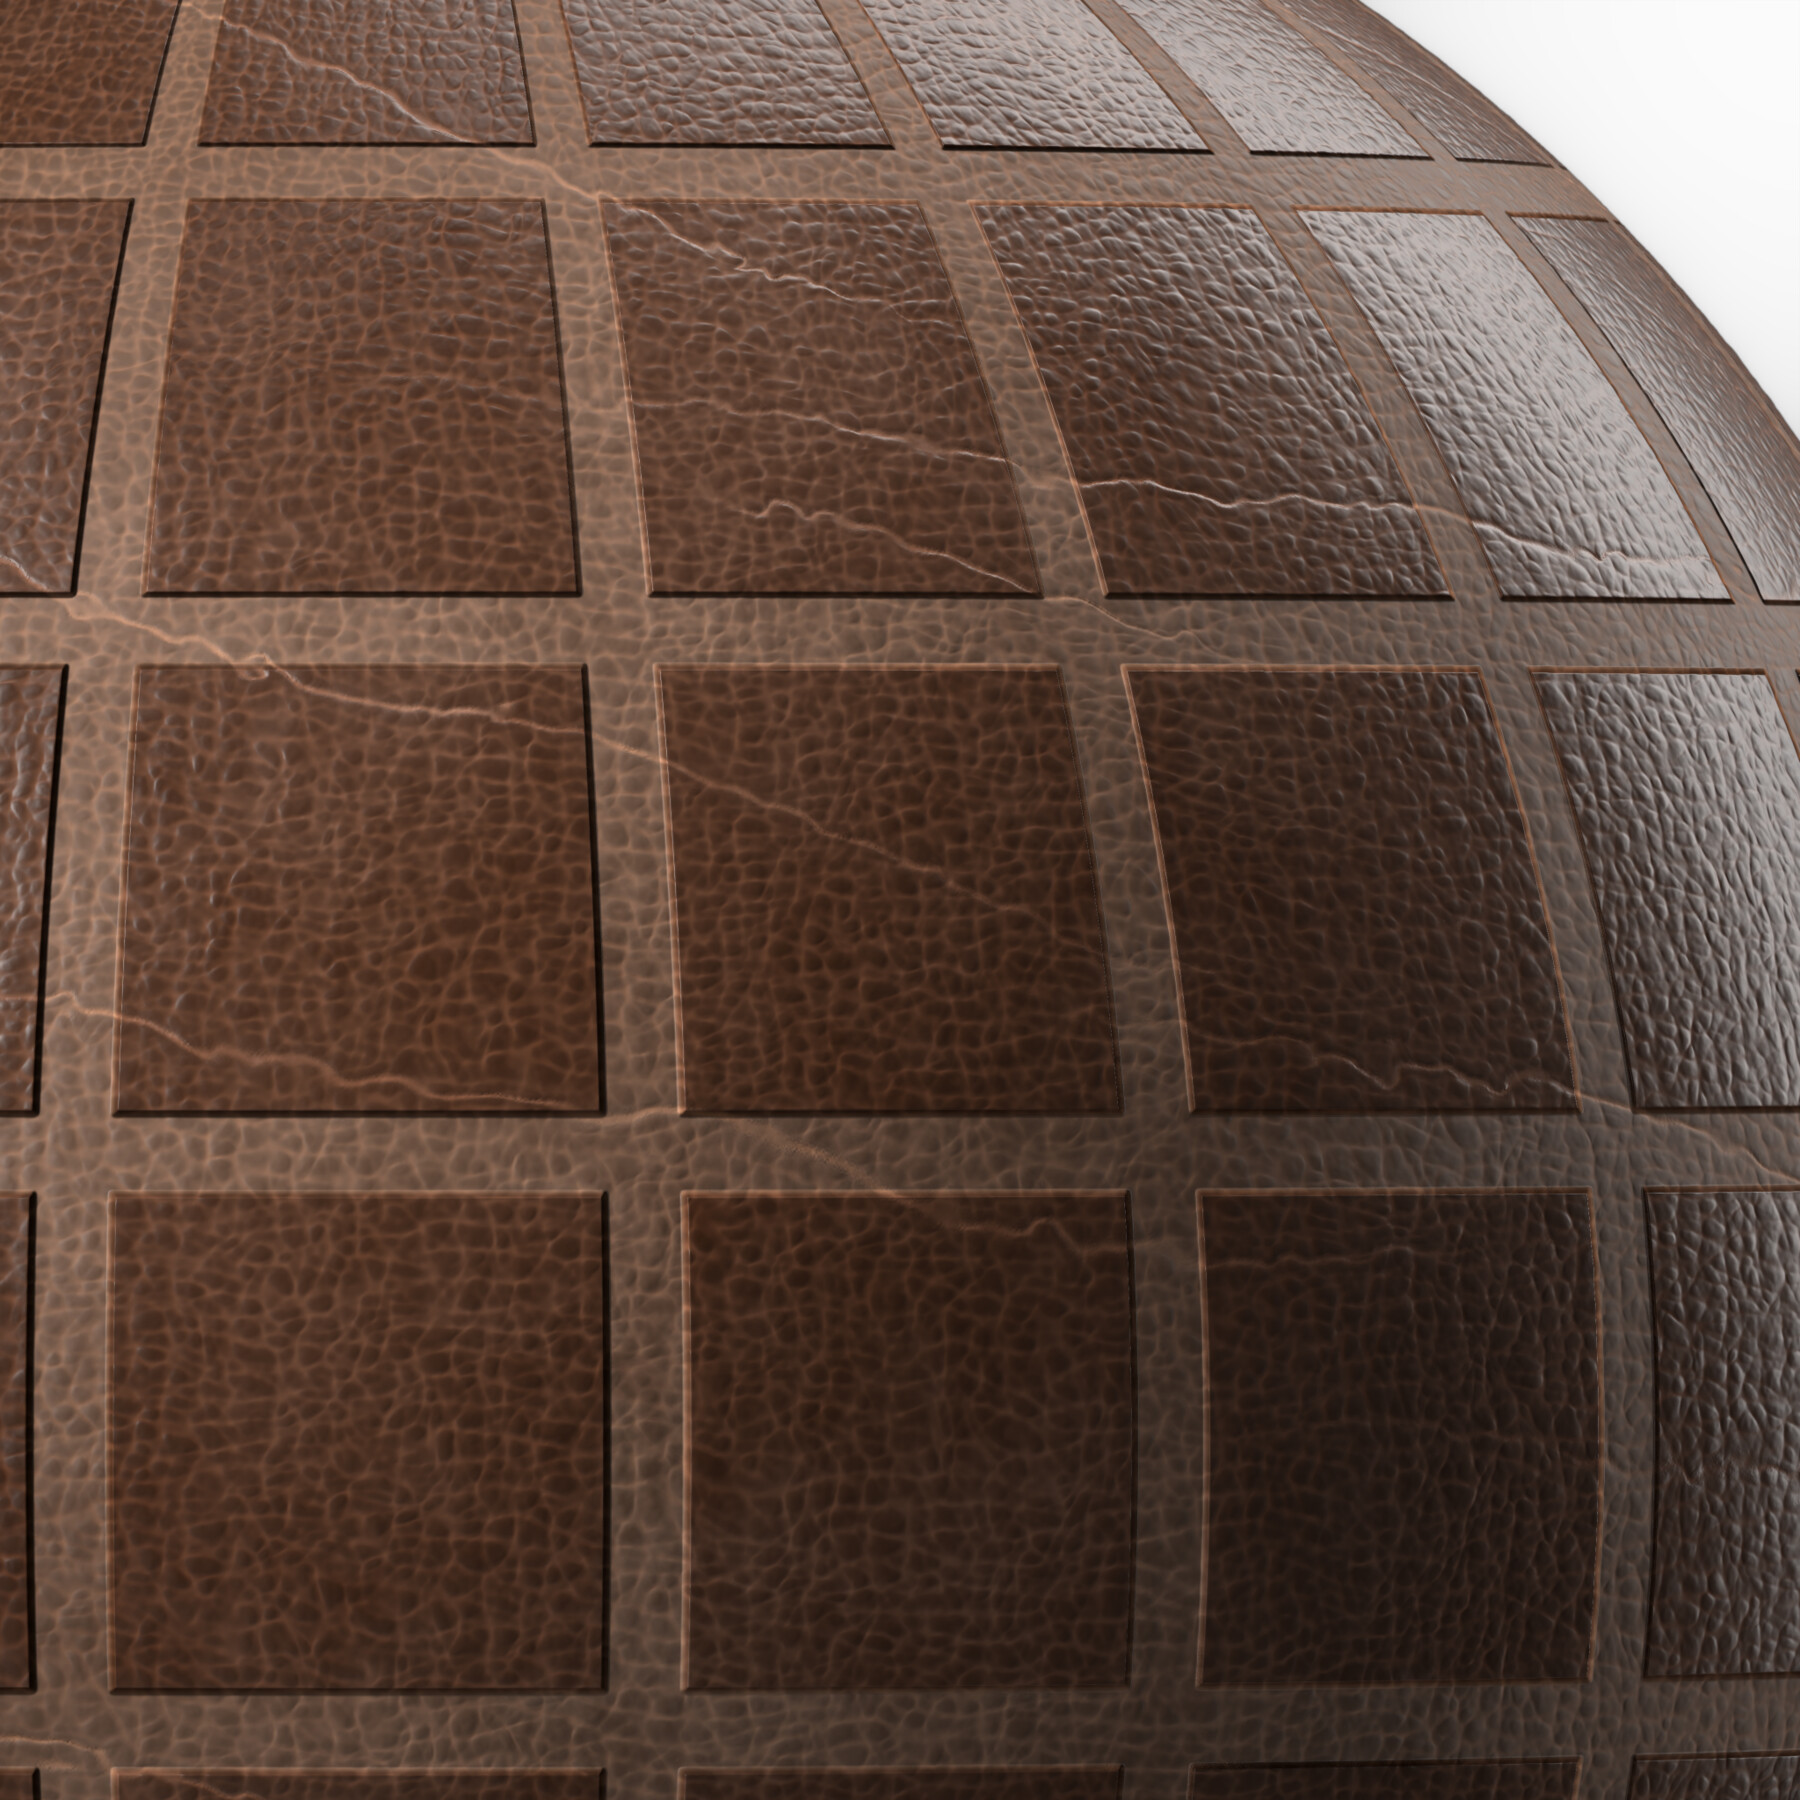 ArtStation - 20 PBR Leather Armor Texture /Seamless (Vol 03), Resources